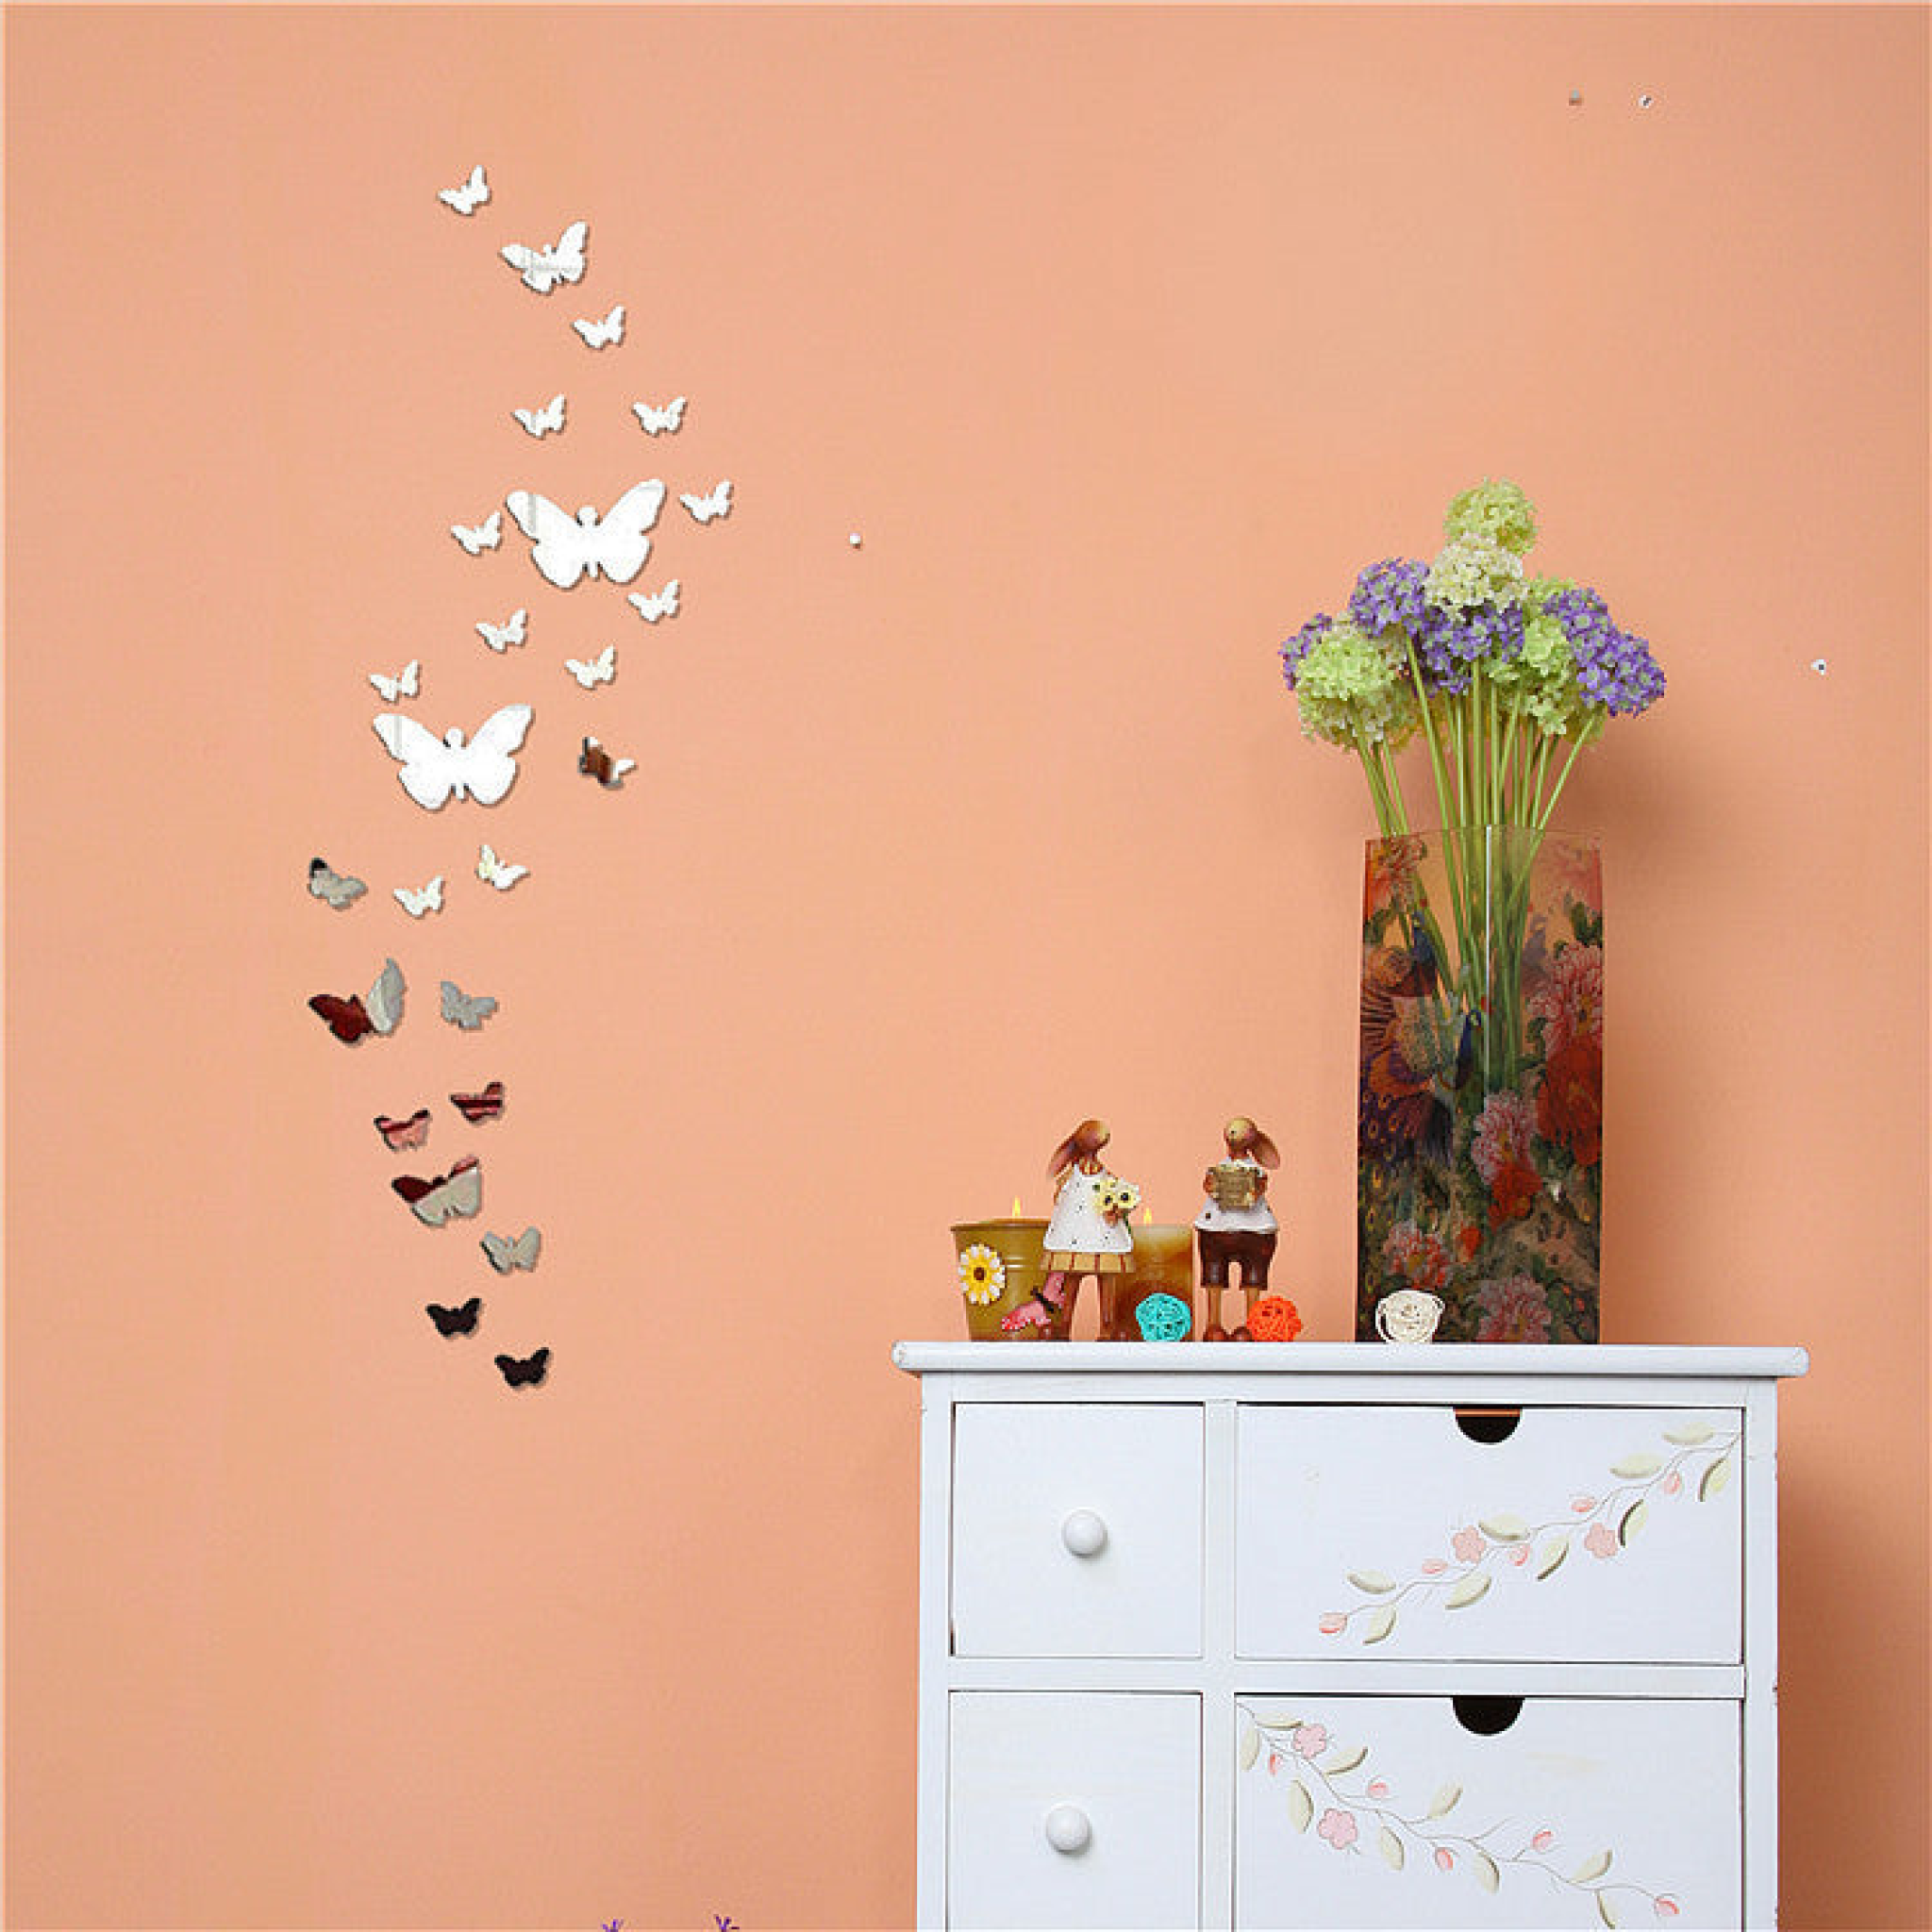 Mirror Wall Decals, Mirror Wall Stickers, Diy Wall Stickers